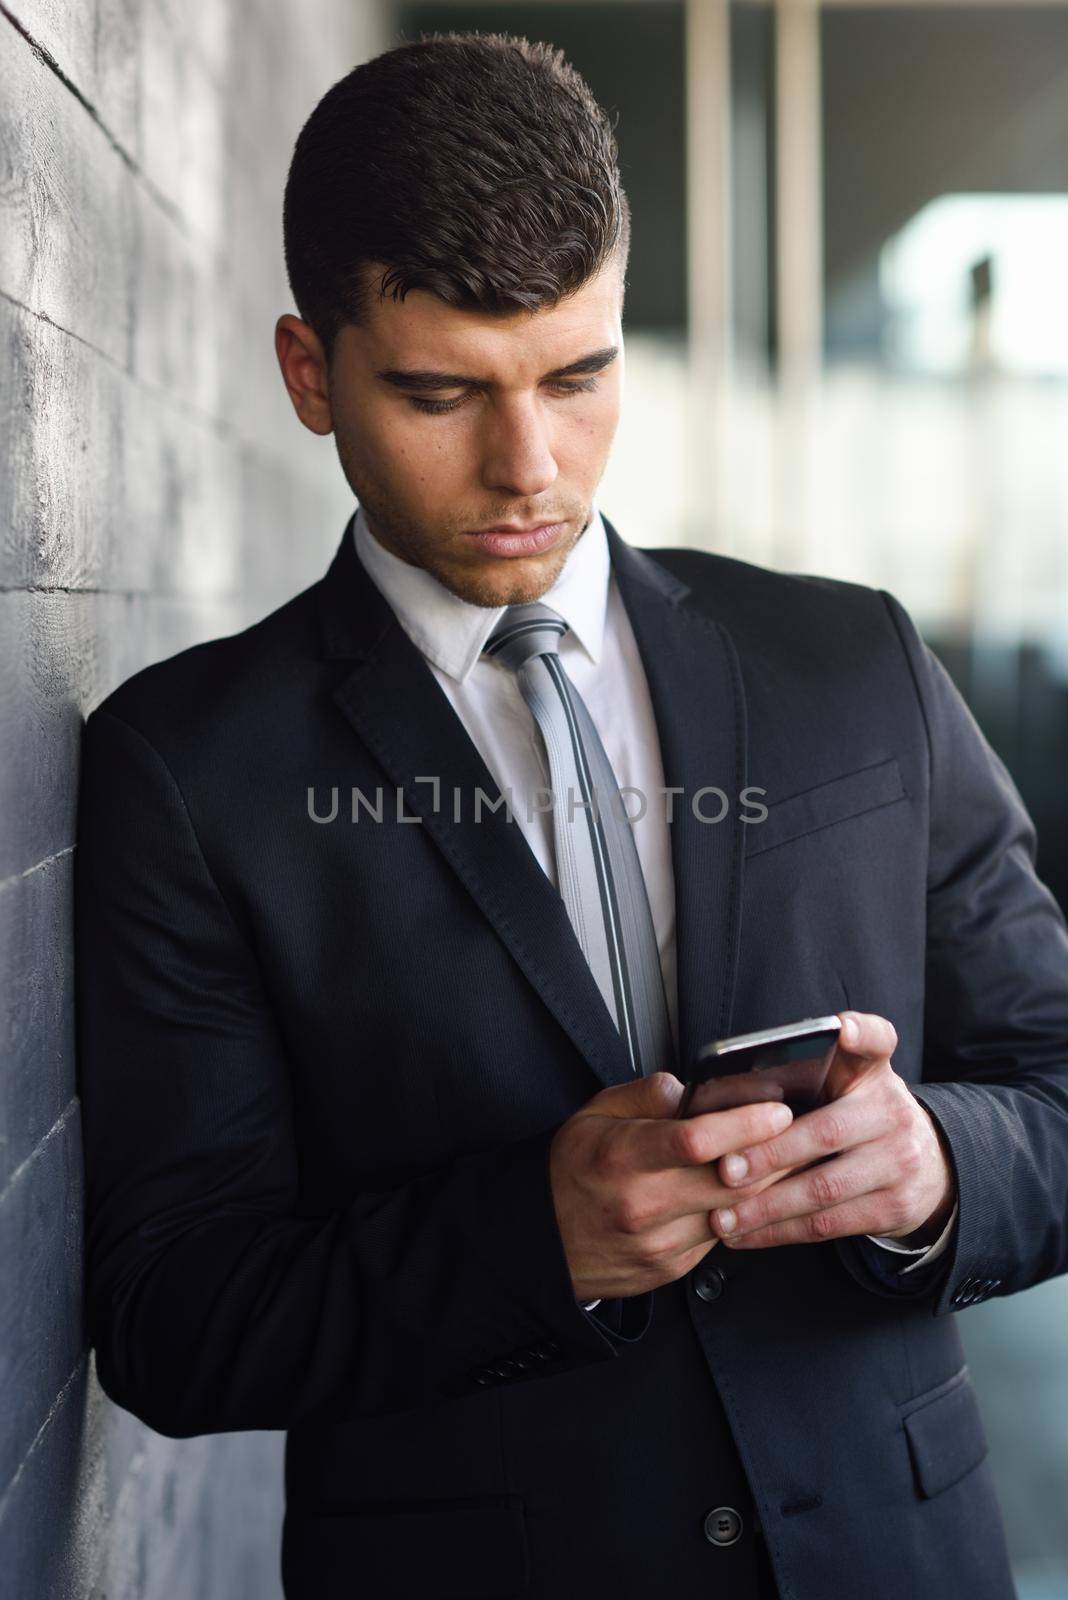 Attractive young businessman on the phone in an office building wearing black suit and tie. Man with blue eyes